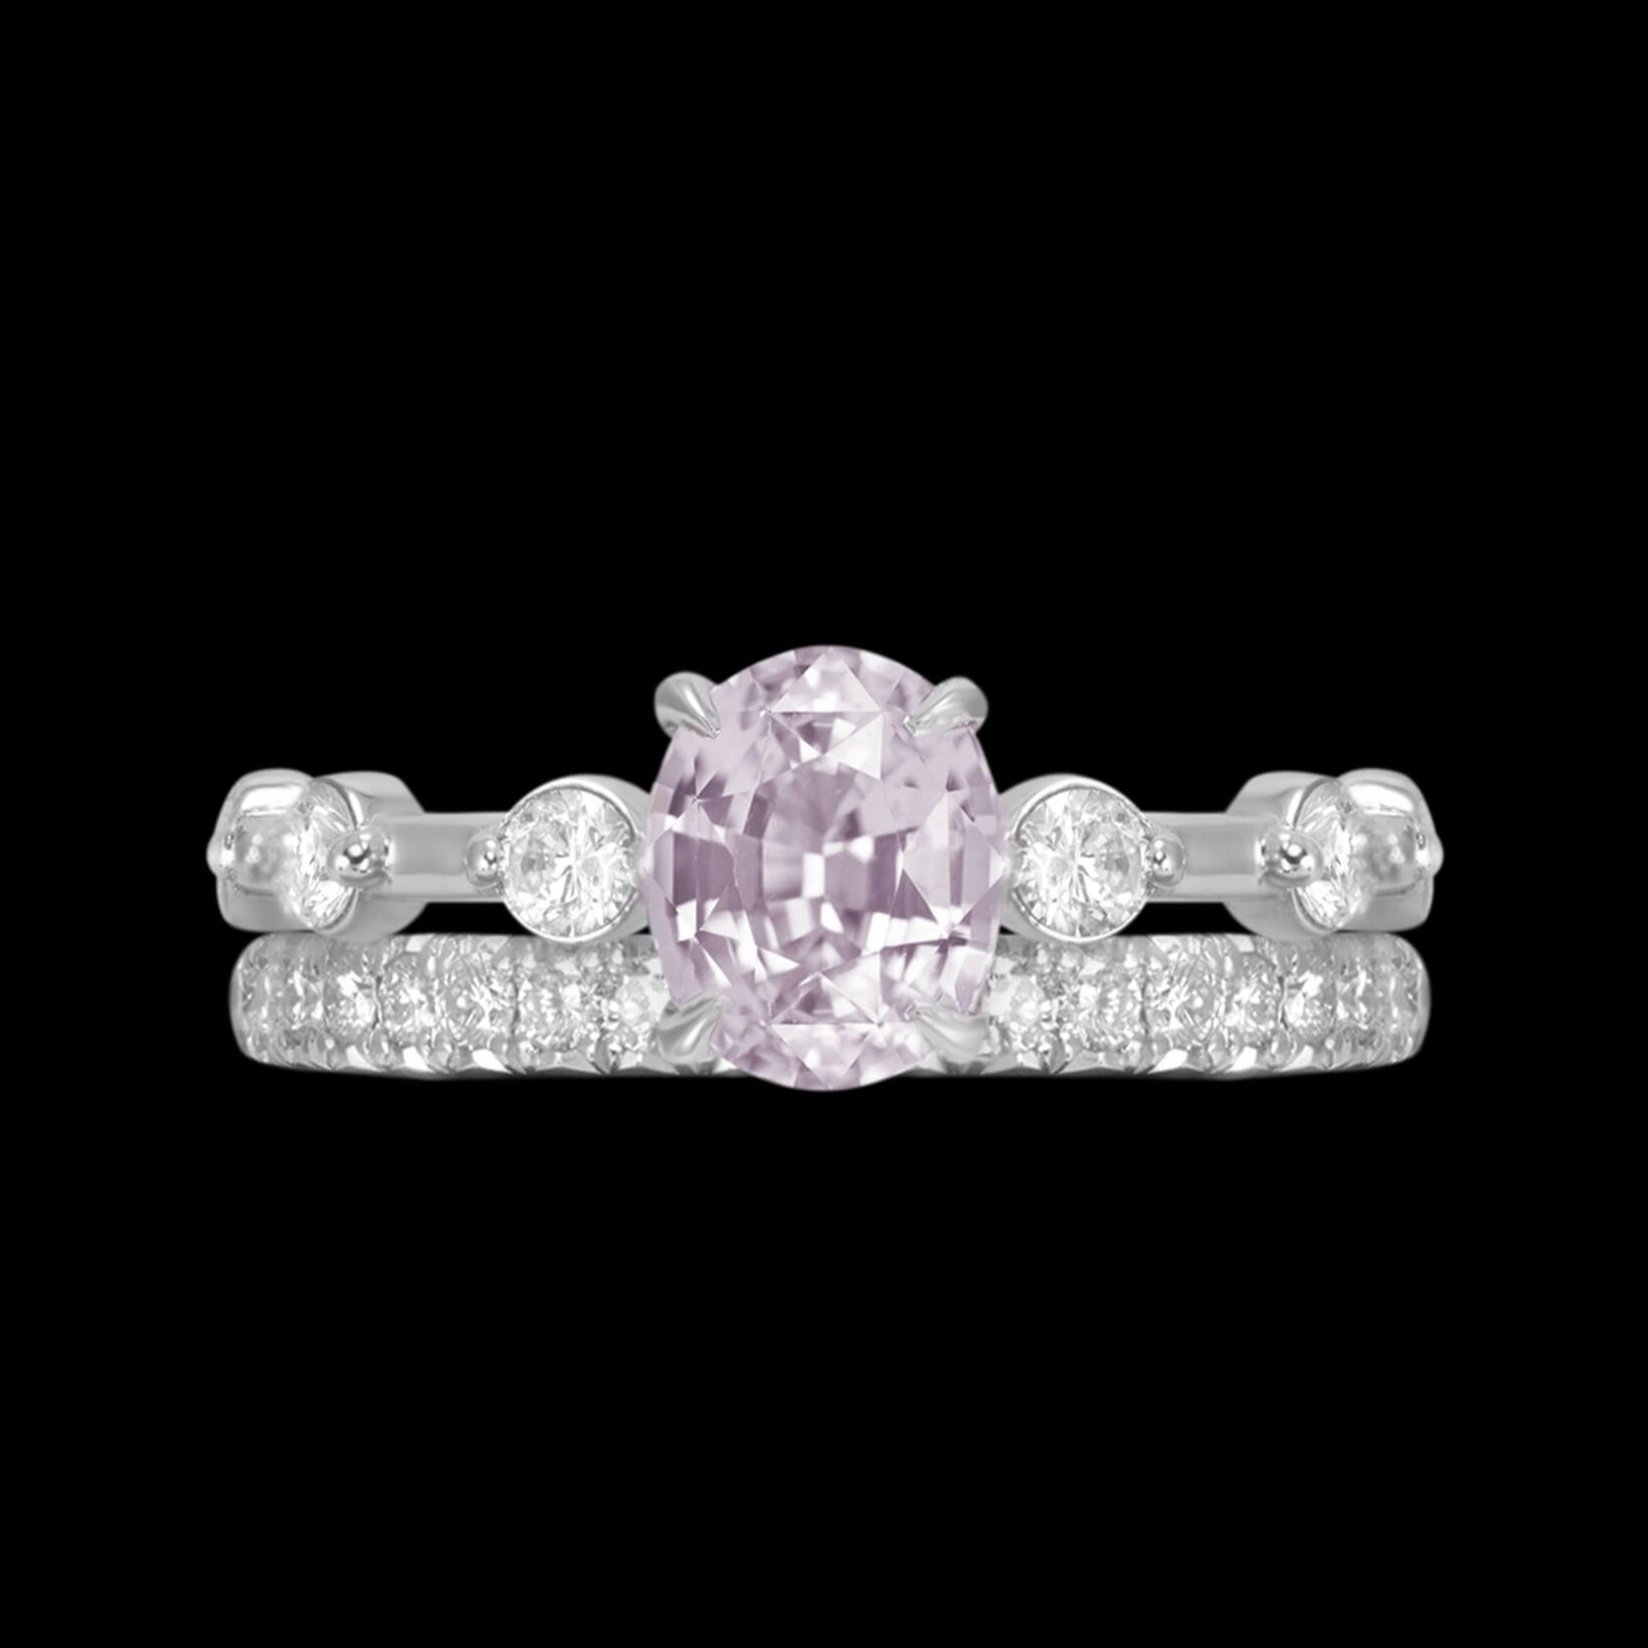 Custom+18kt+white+gold+engagement+ring+with+an+oval+pink+sapphire+and+diamonds+with+matching+wedding+band+-+Classic.+FRIDA+%7C+Fine+Jewellery.jpg